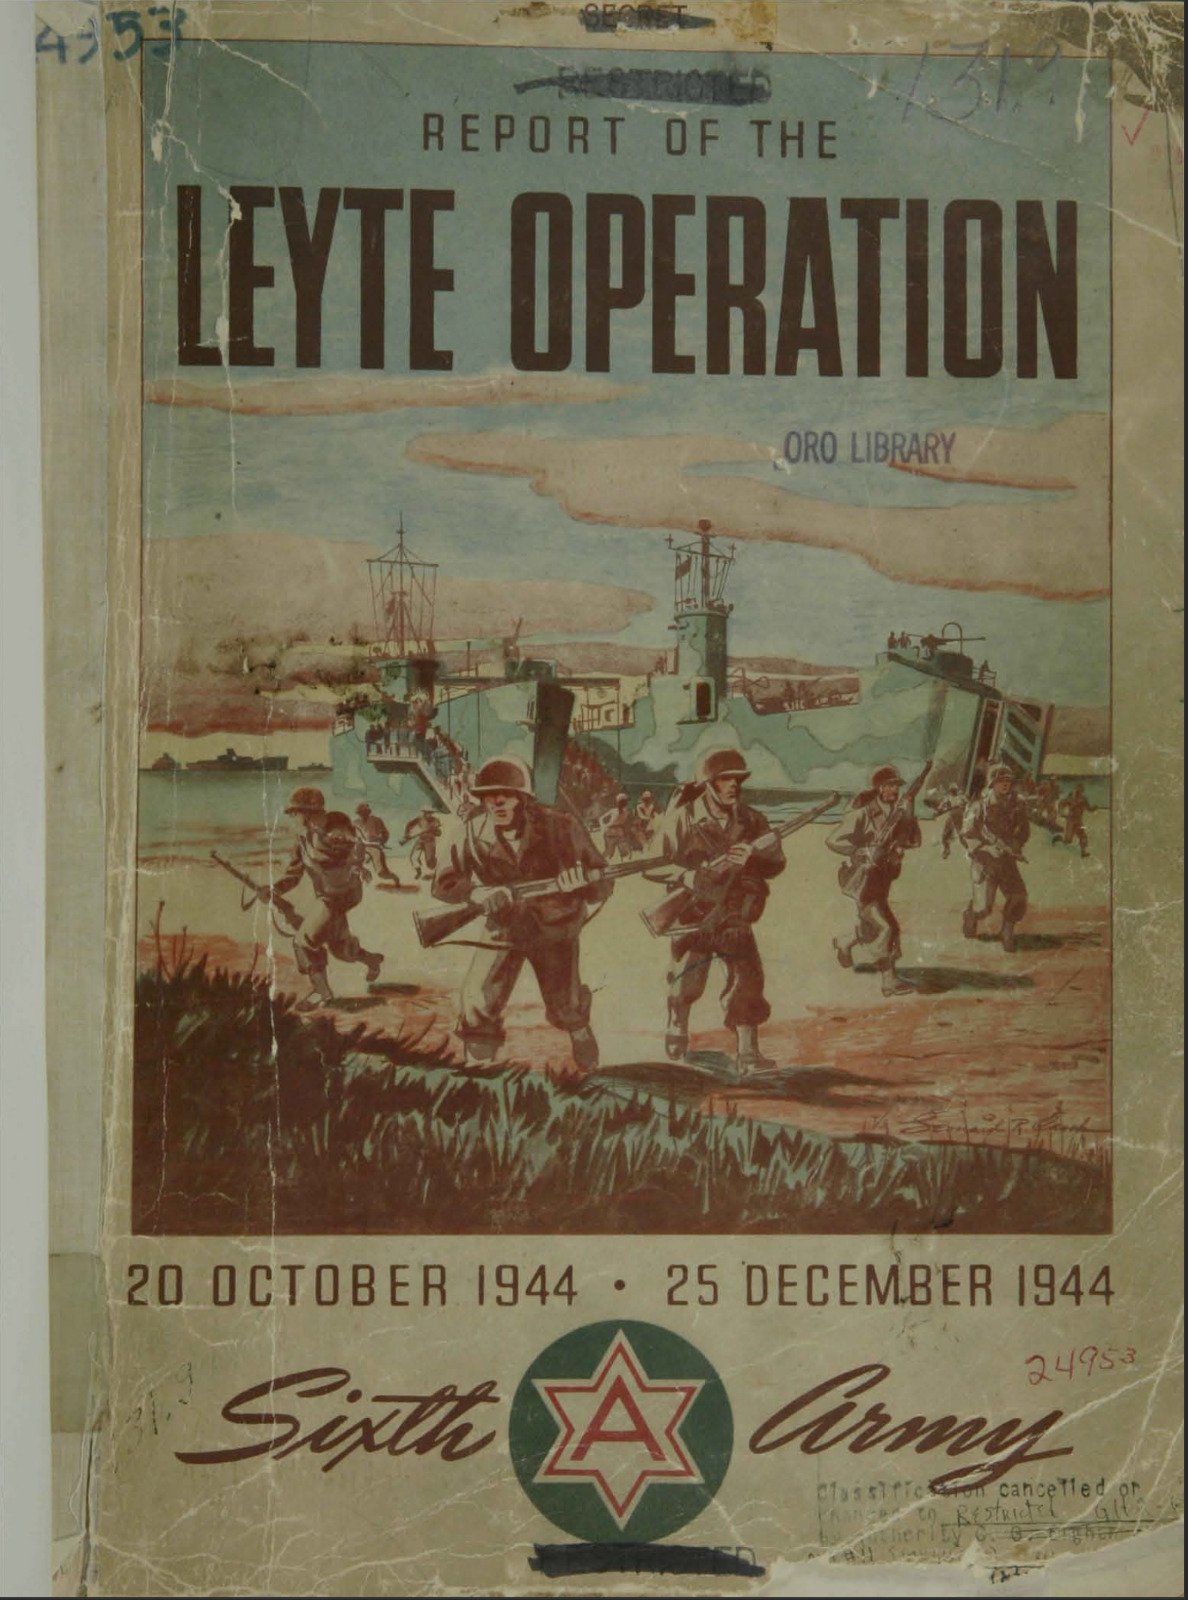 244 Page Report Leyte Operation 20 Oct - 25 Dec 1944 Sixth Army Book on Data CD